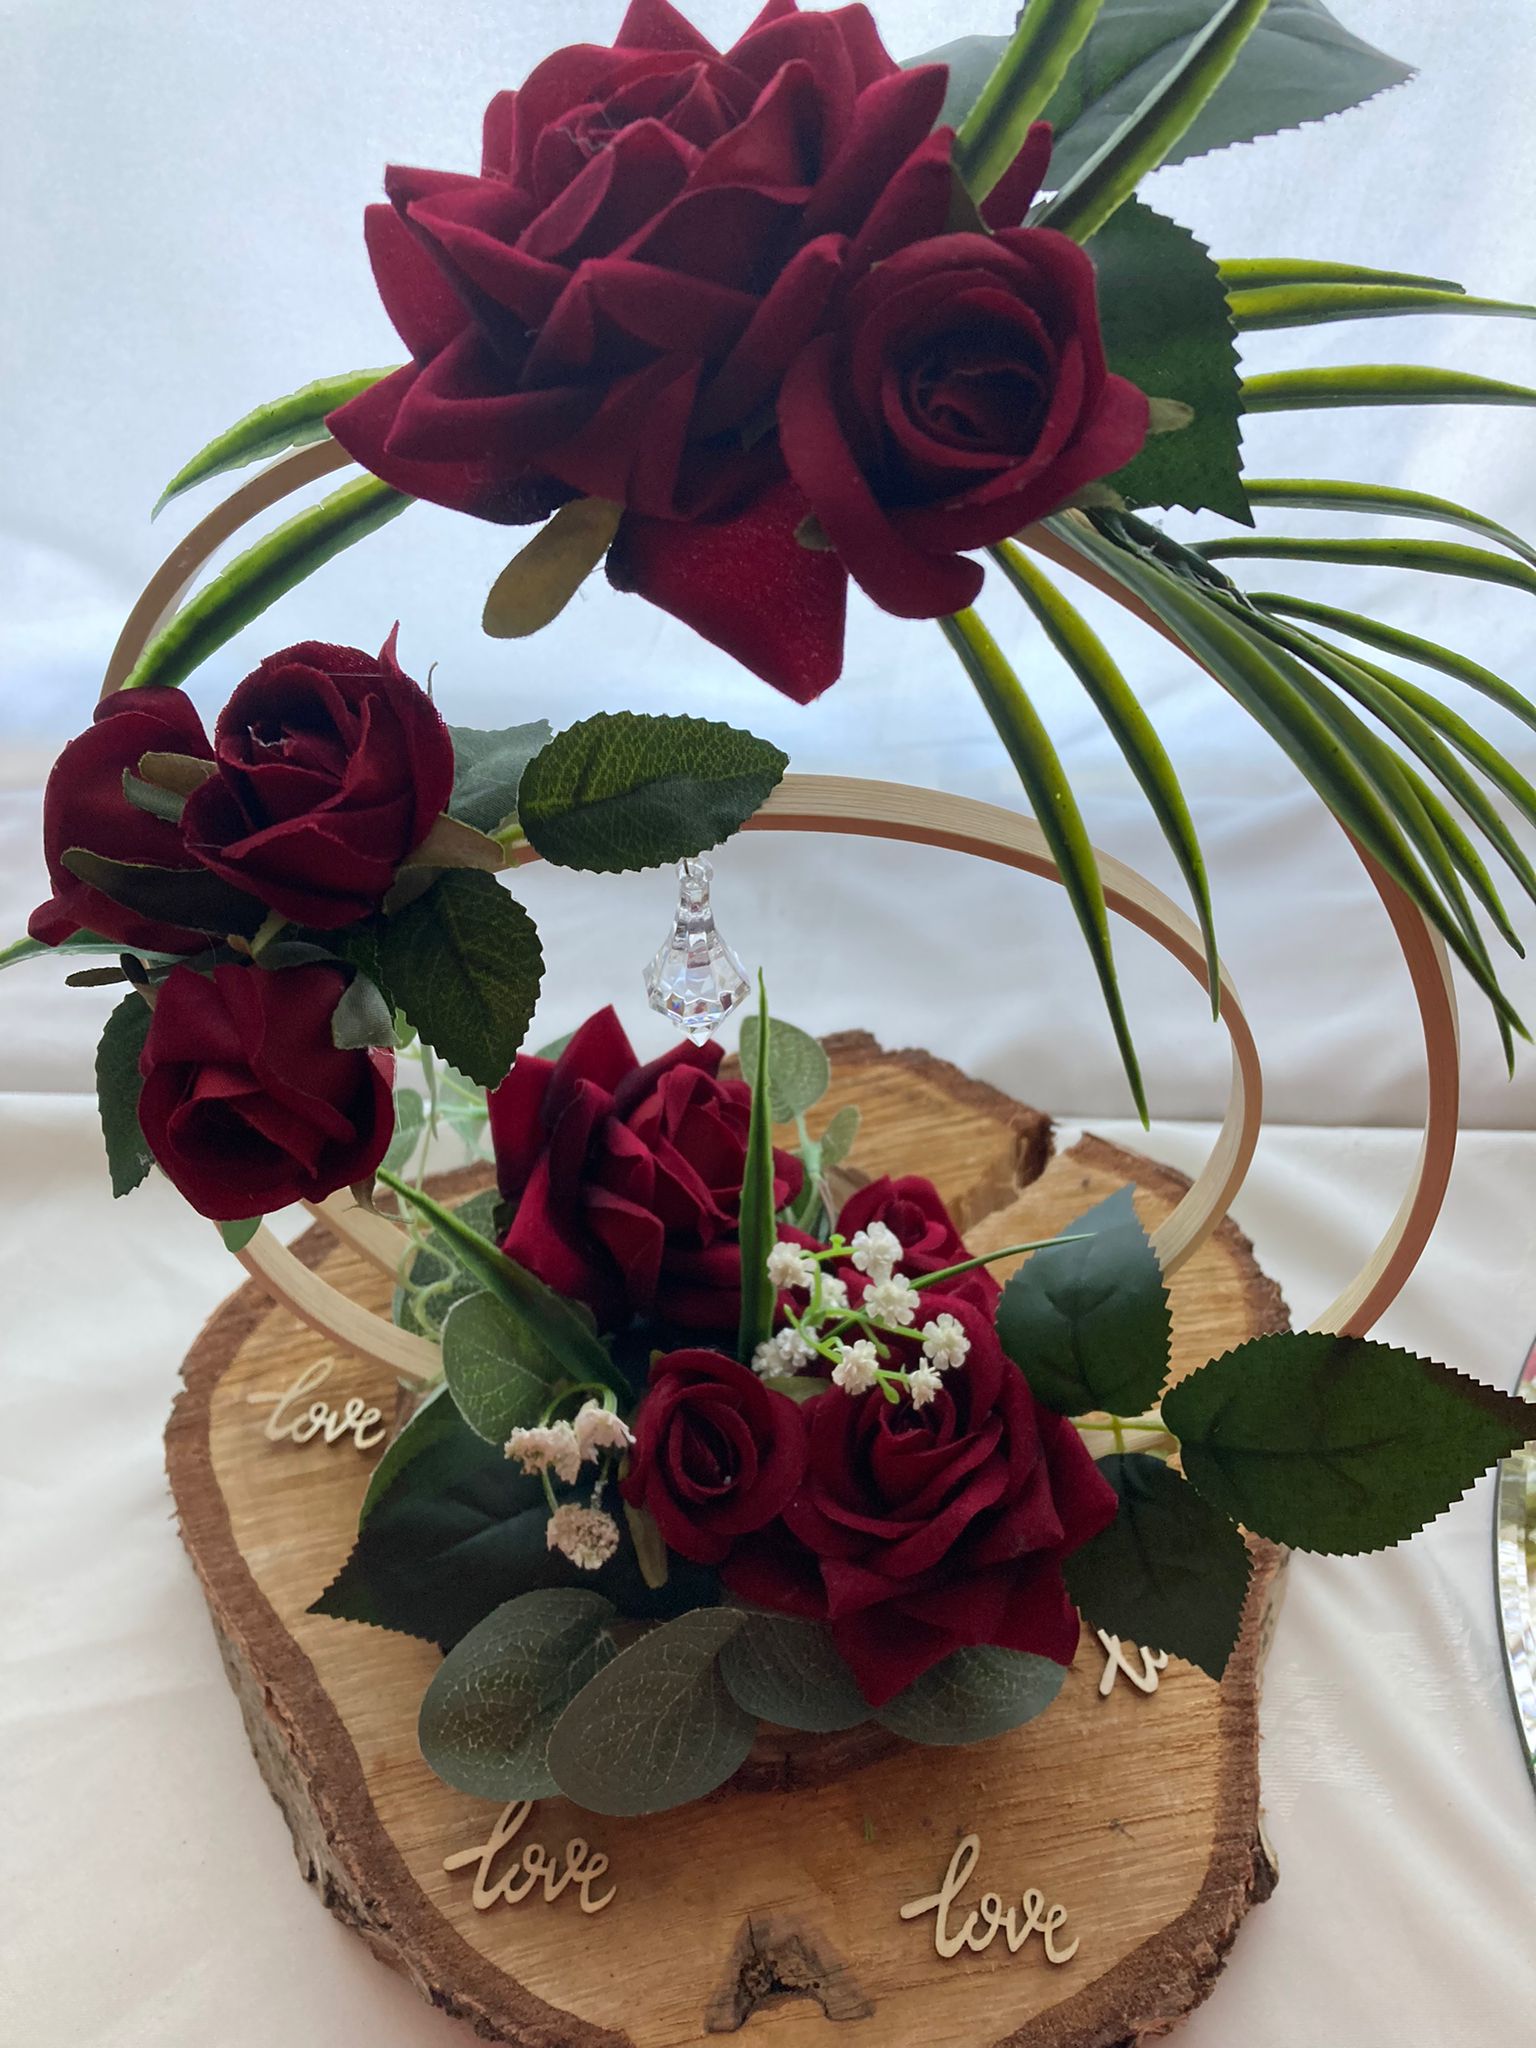 Wooden hoop centrepieces with red rose flowers